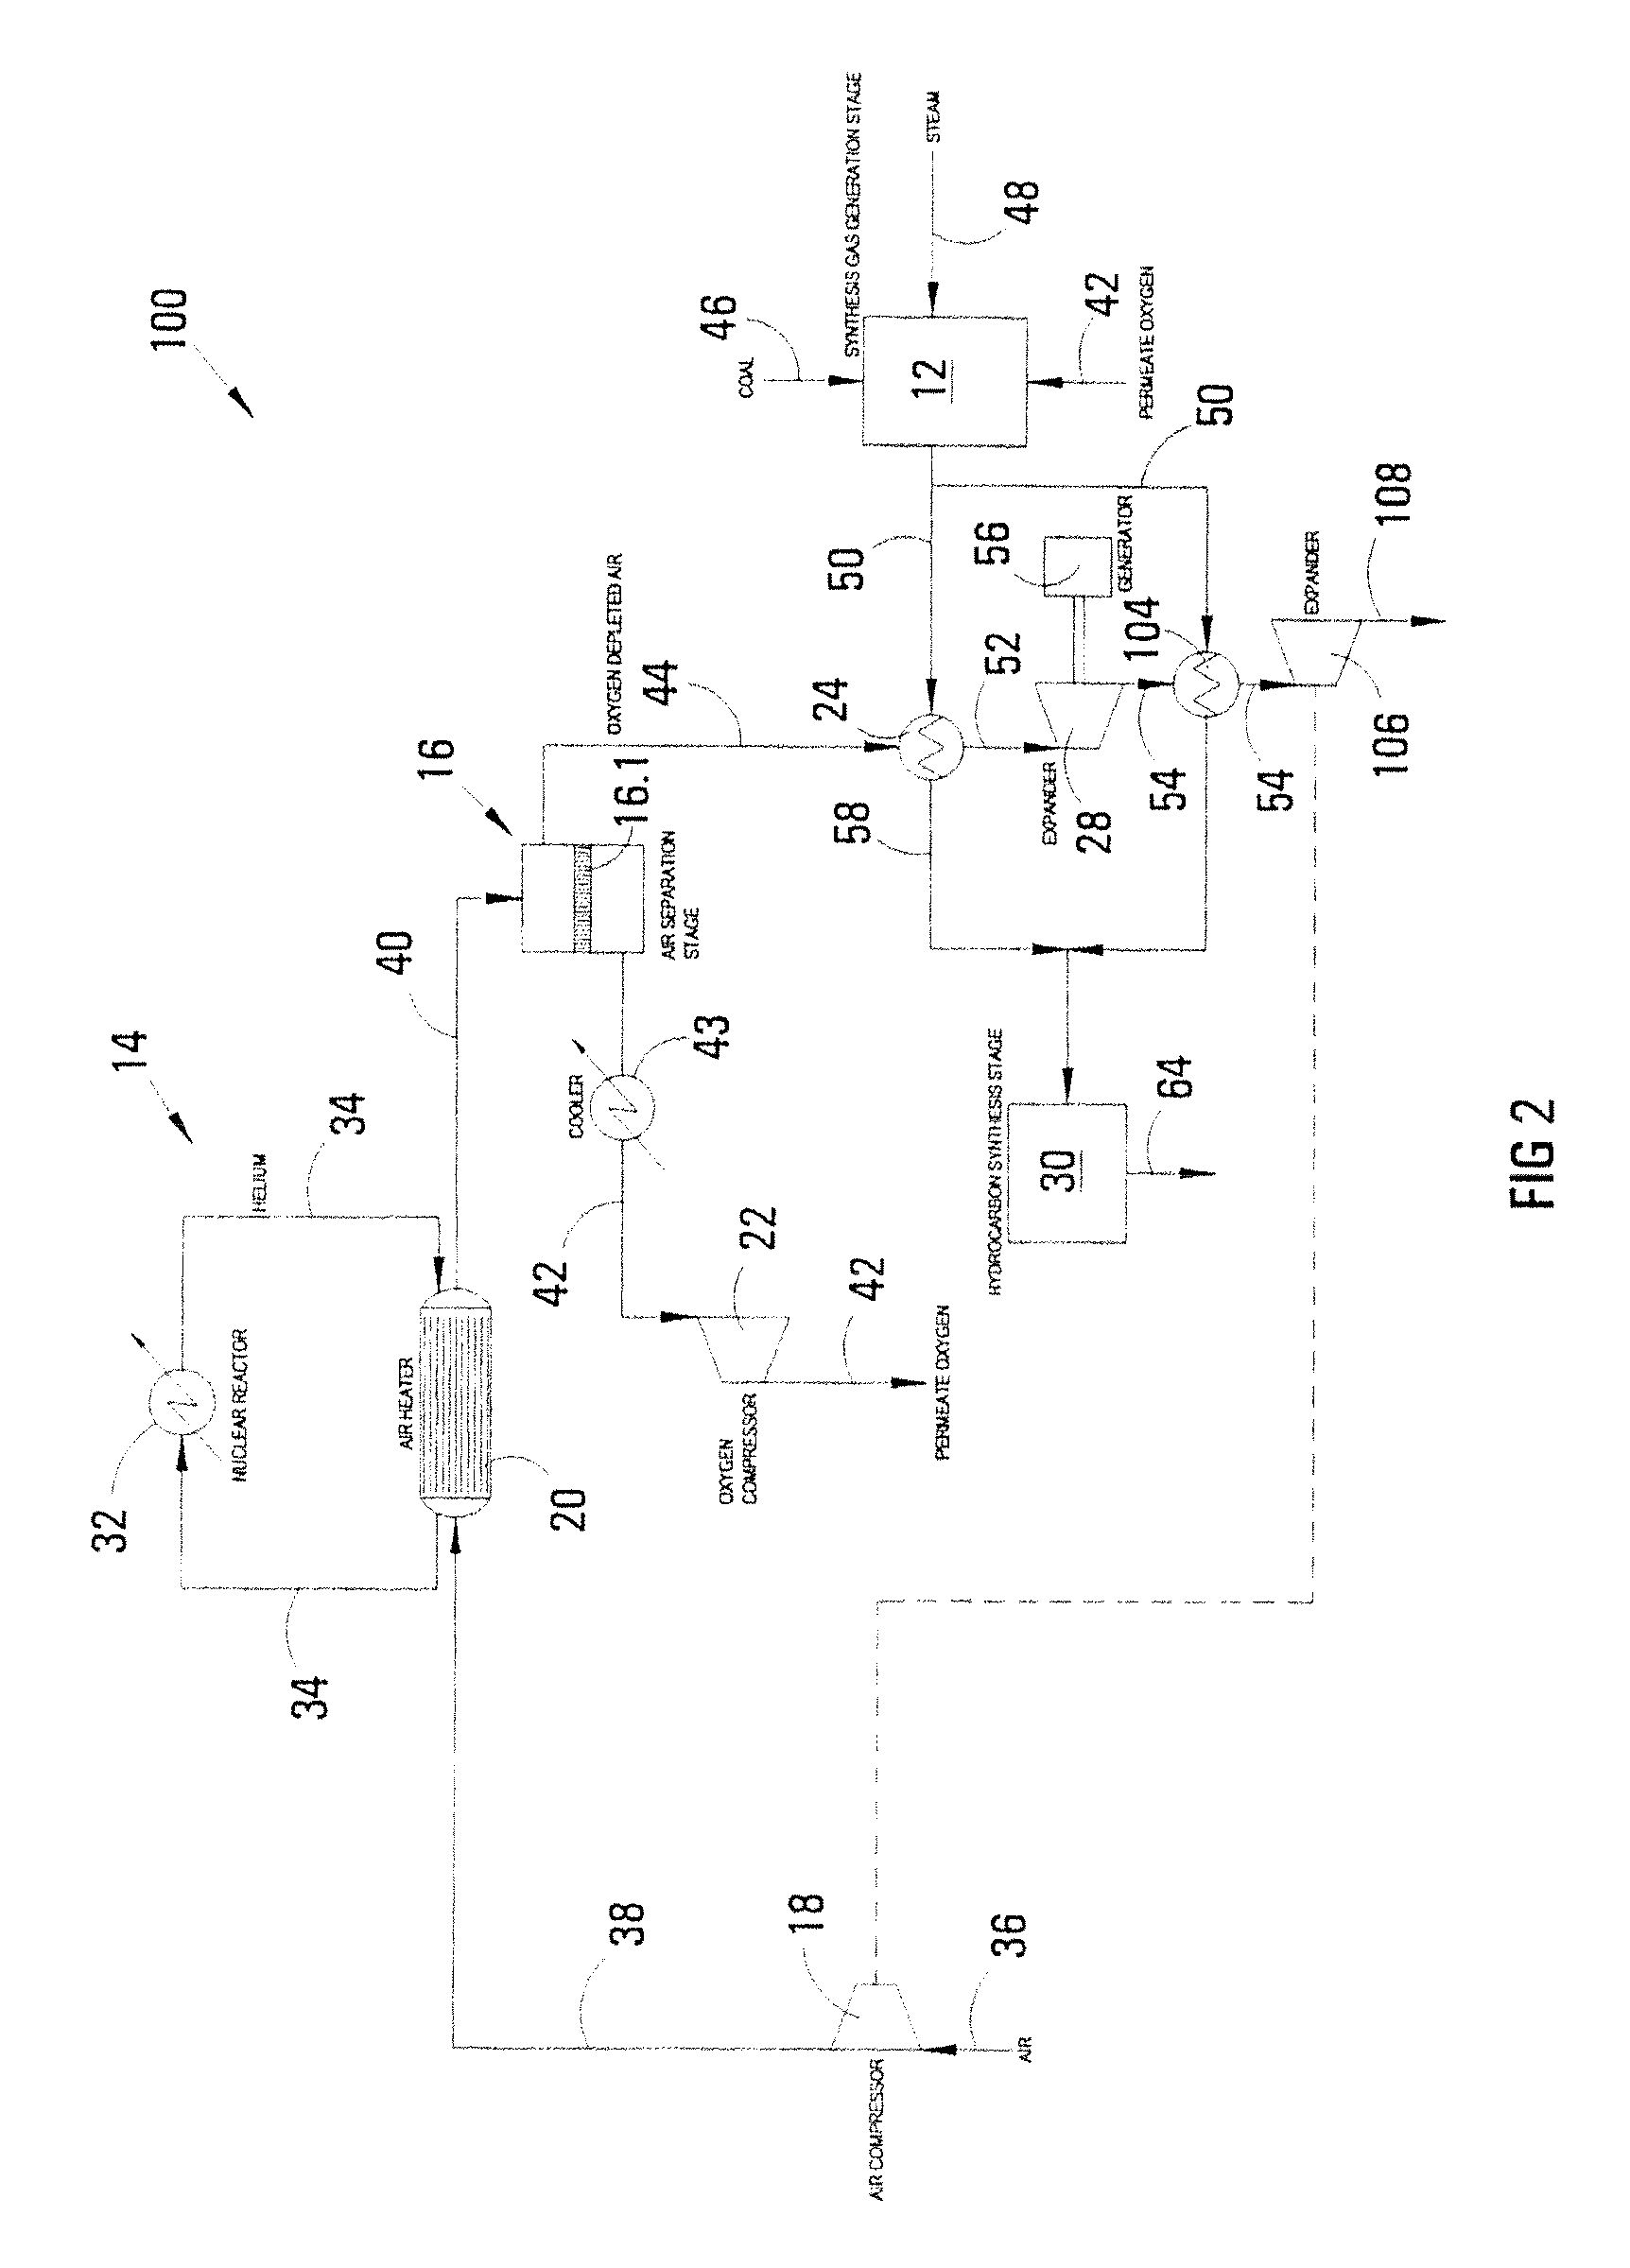 Process for co-producing synthesis gas and power